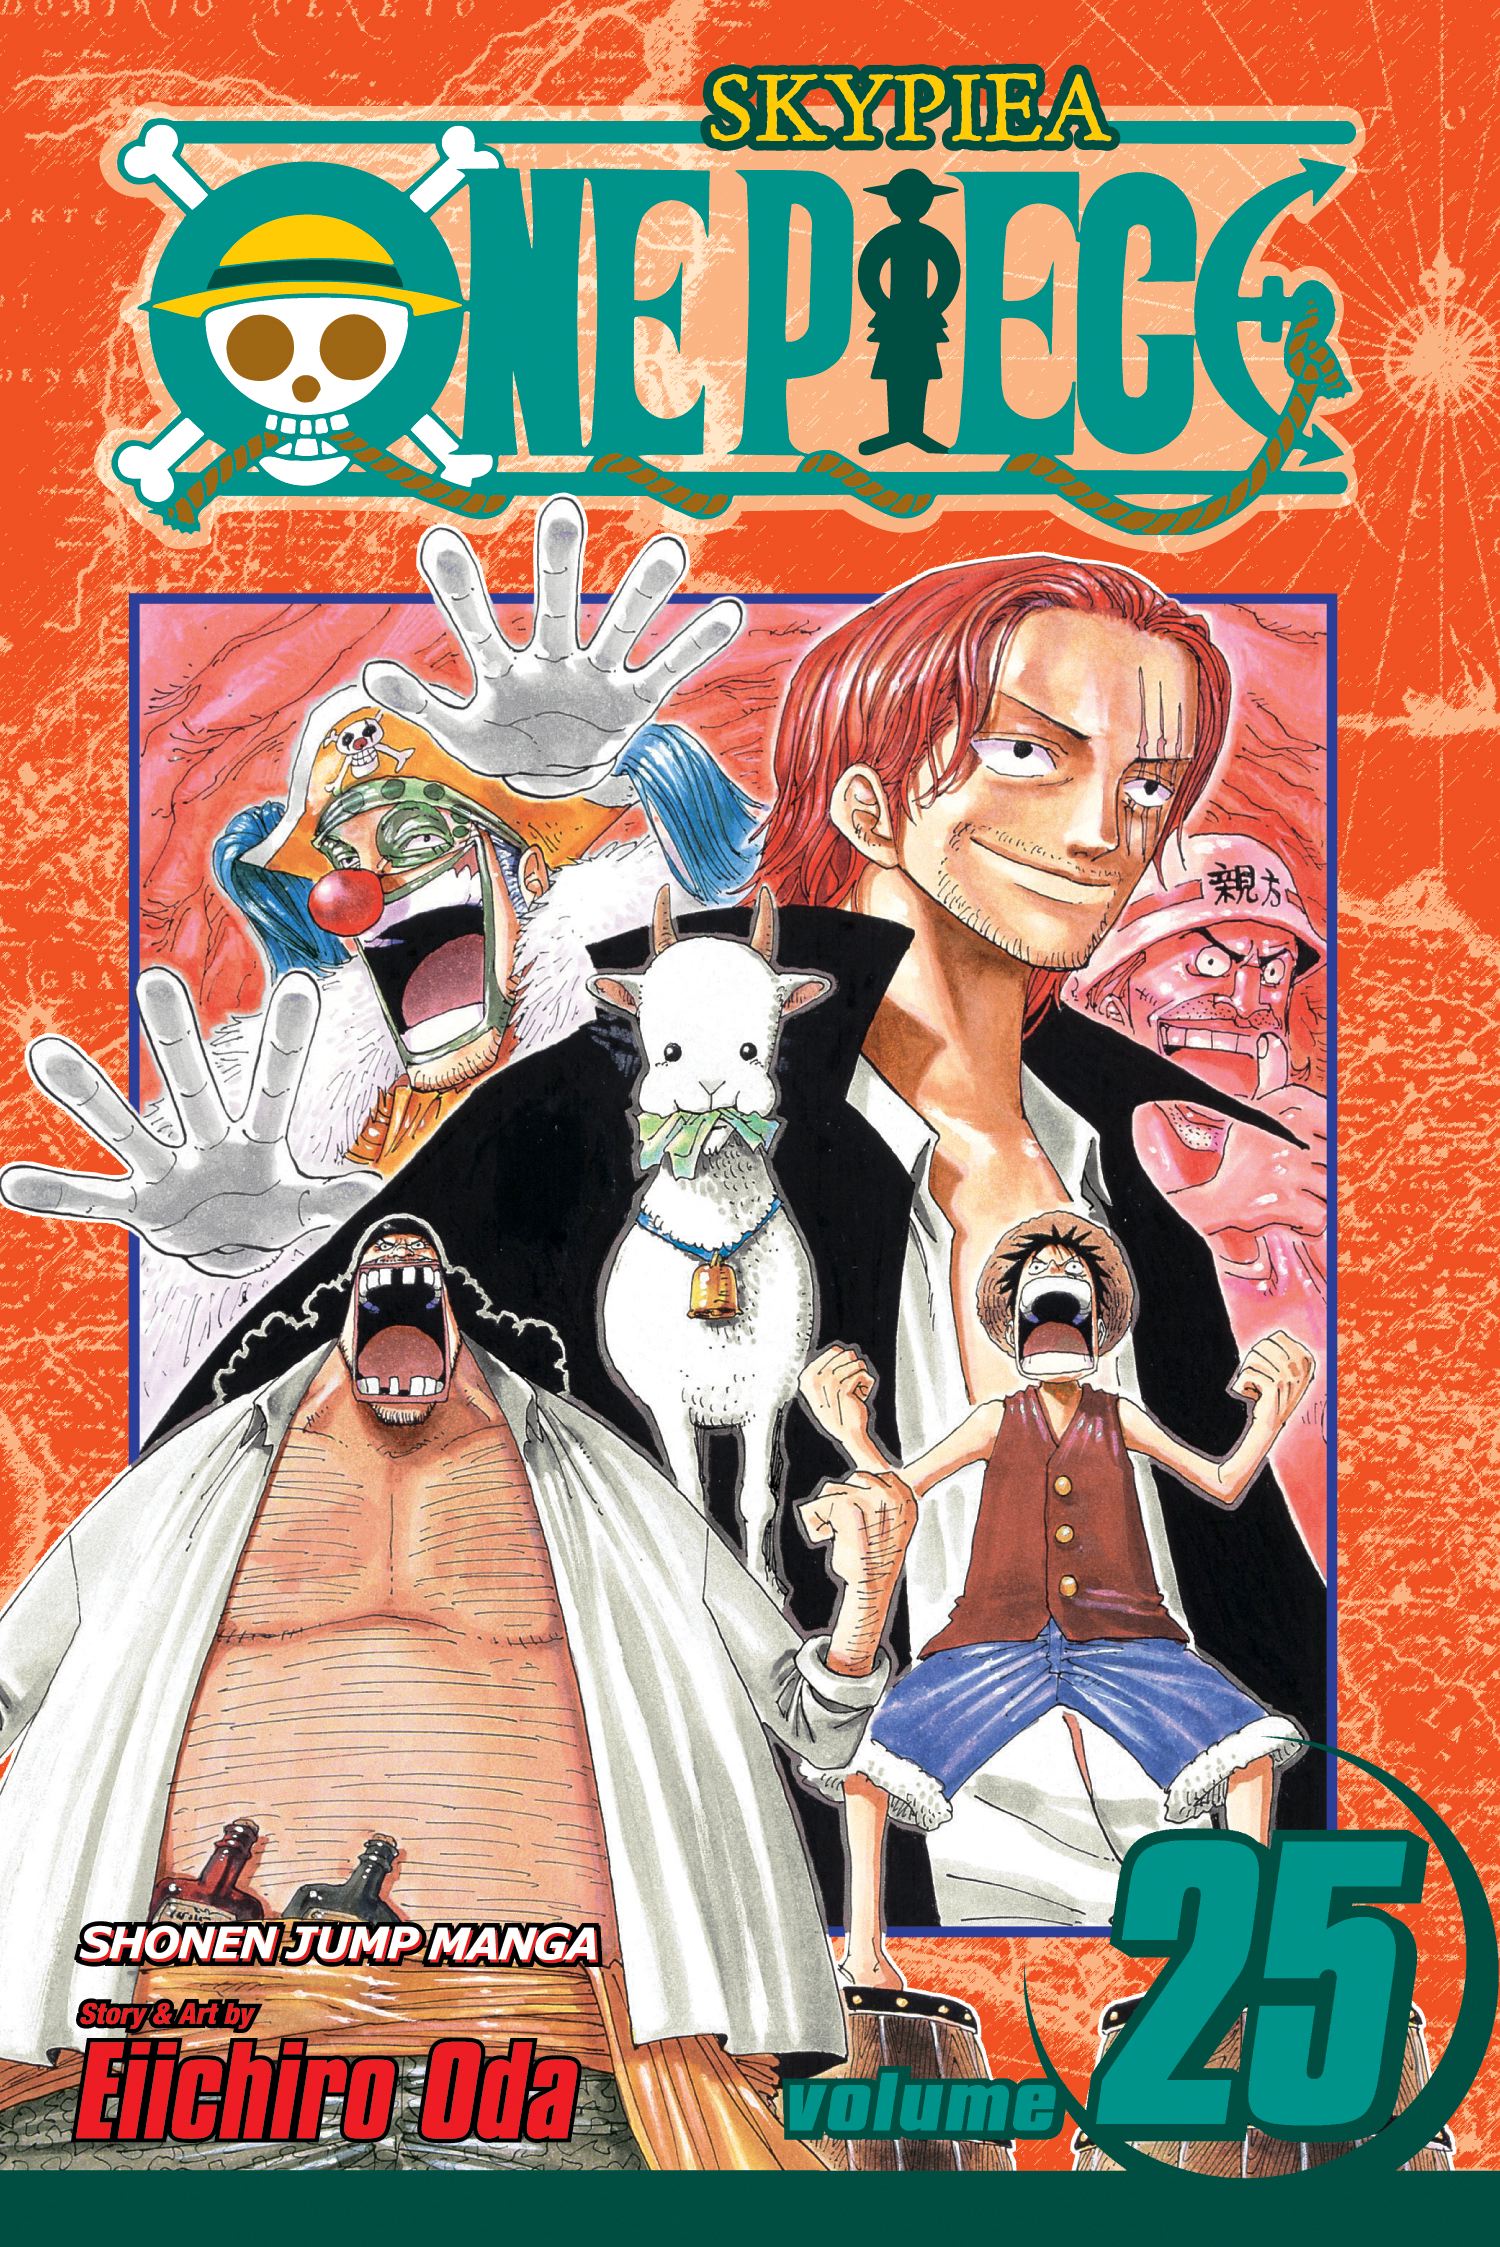 One Piece Box Set 2: Skypeia and Water Seven